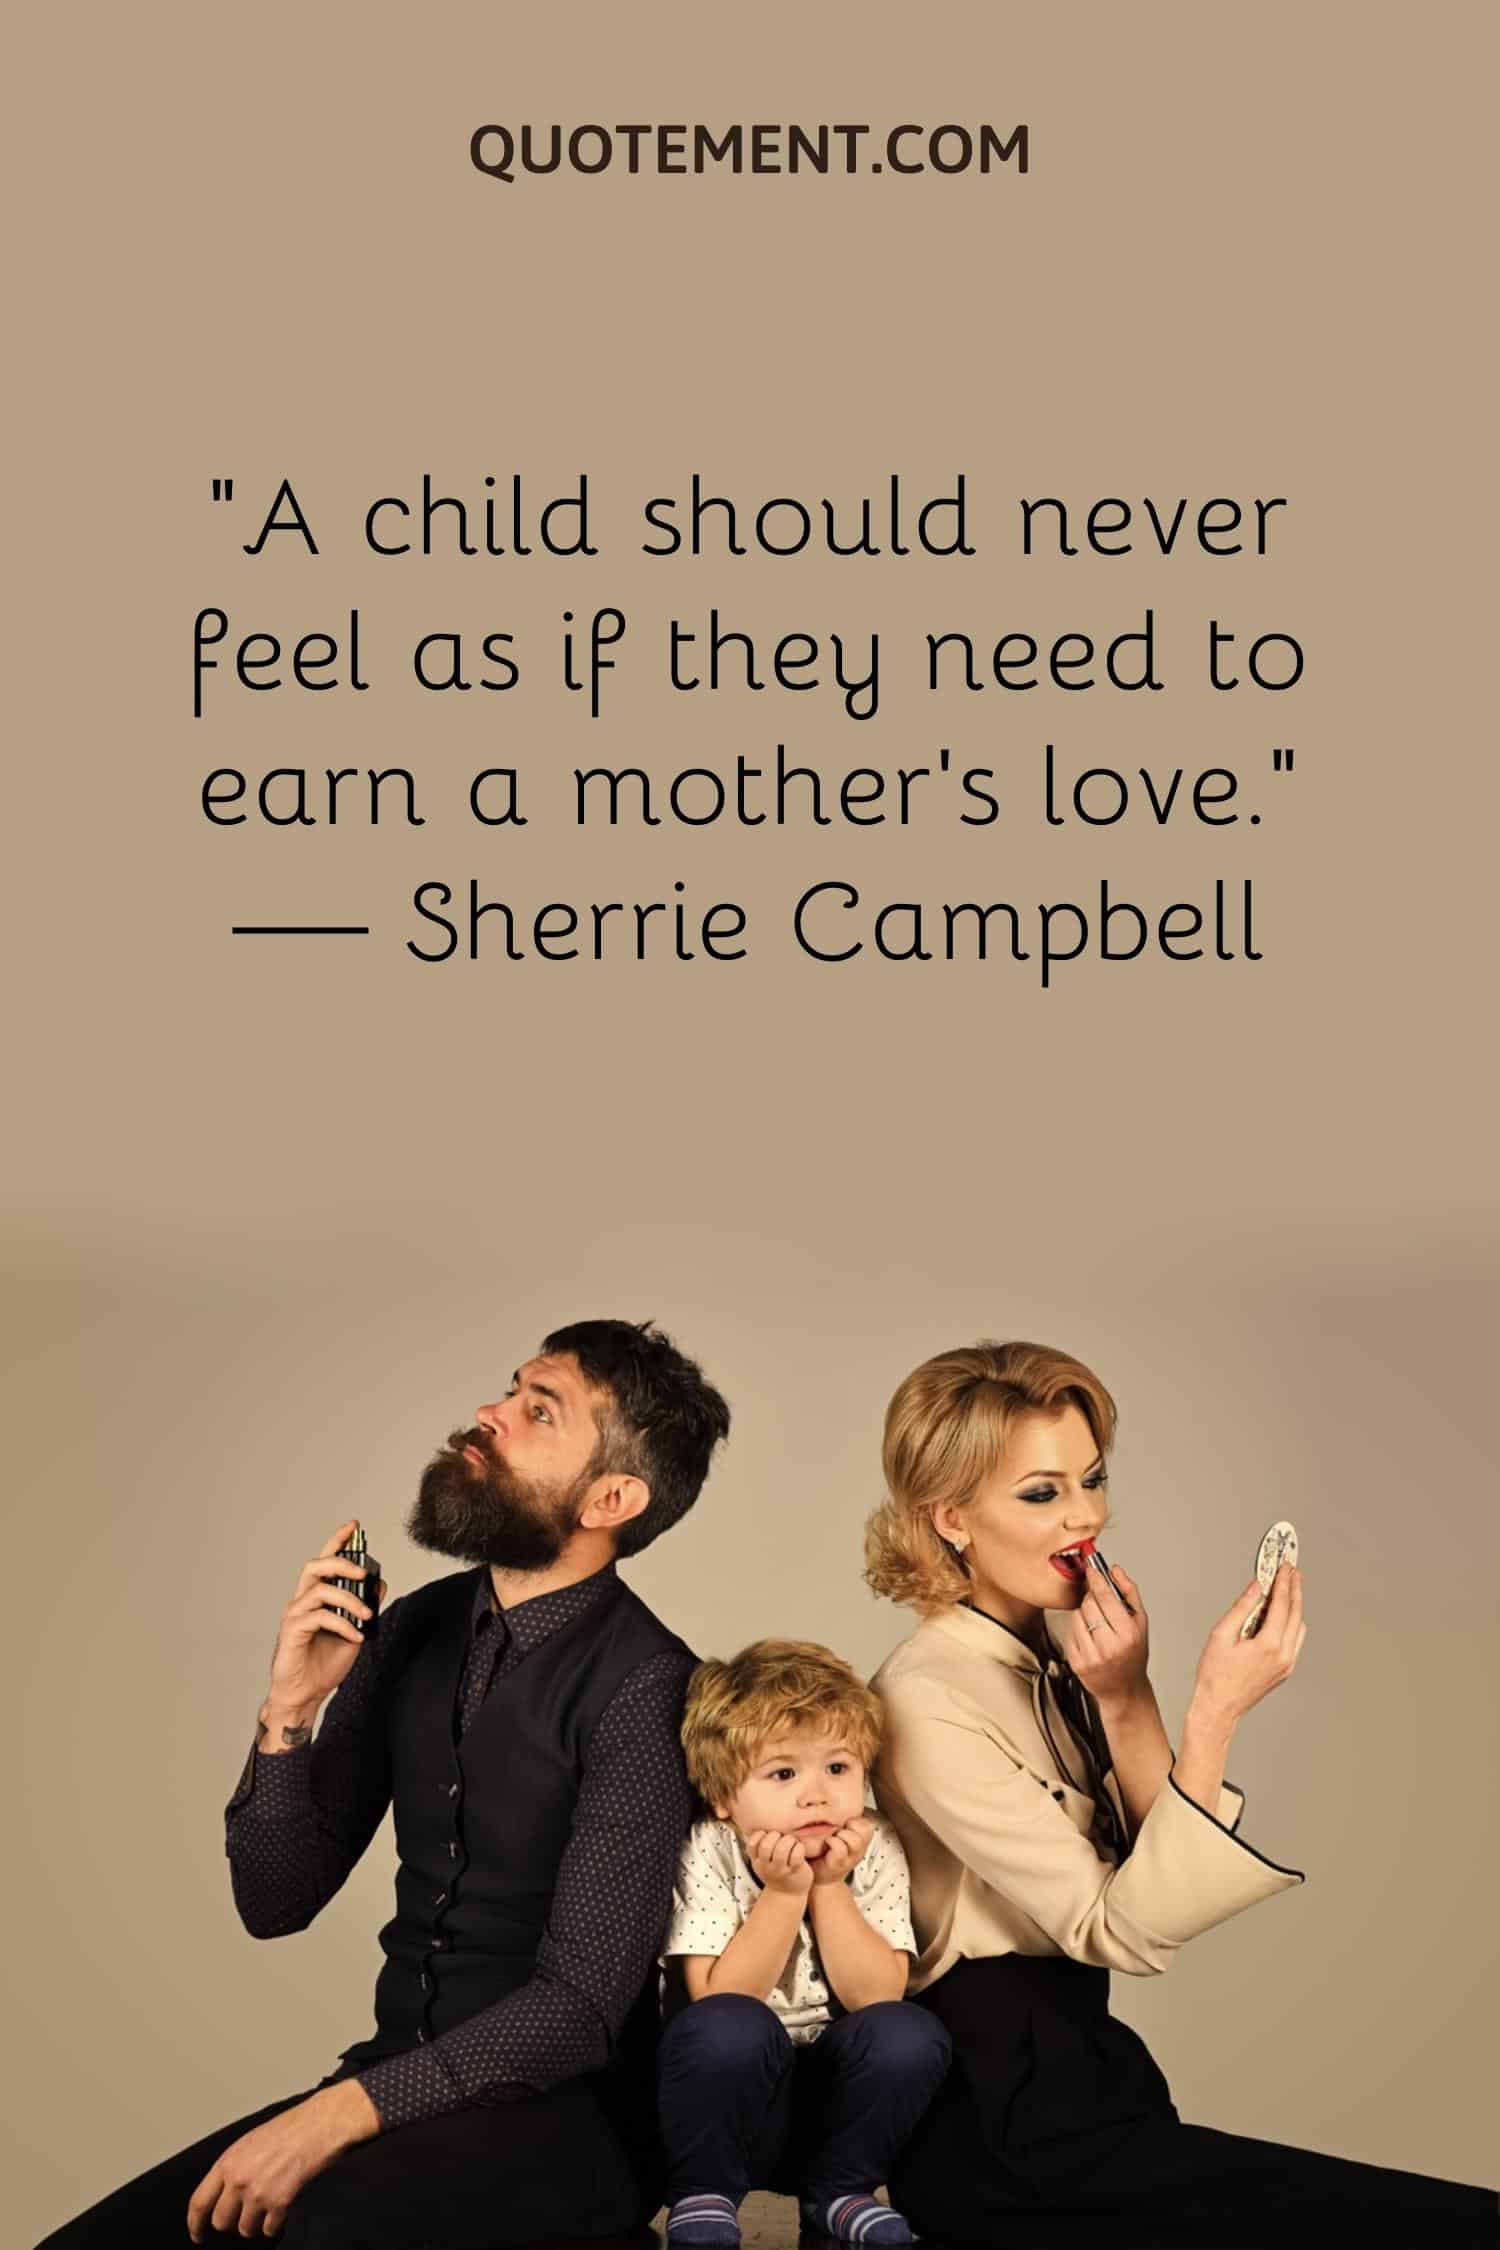 A child should never feel as if they need to earn a mother’s love